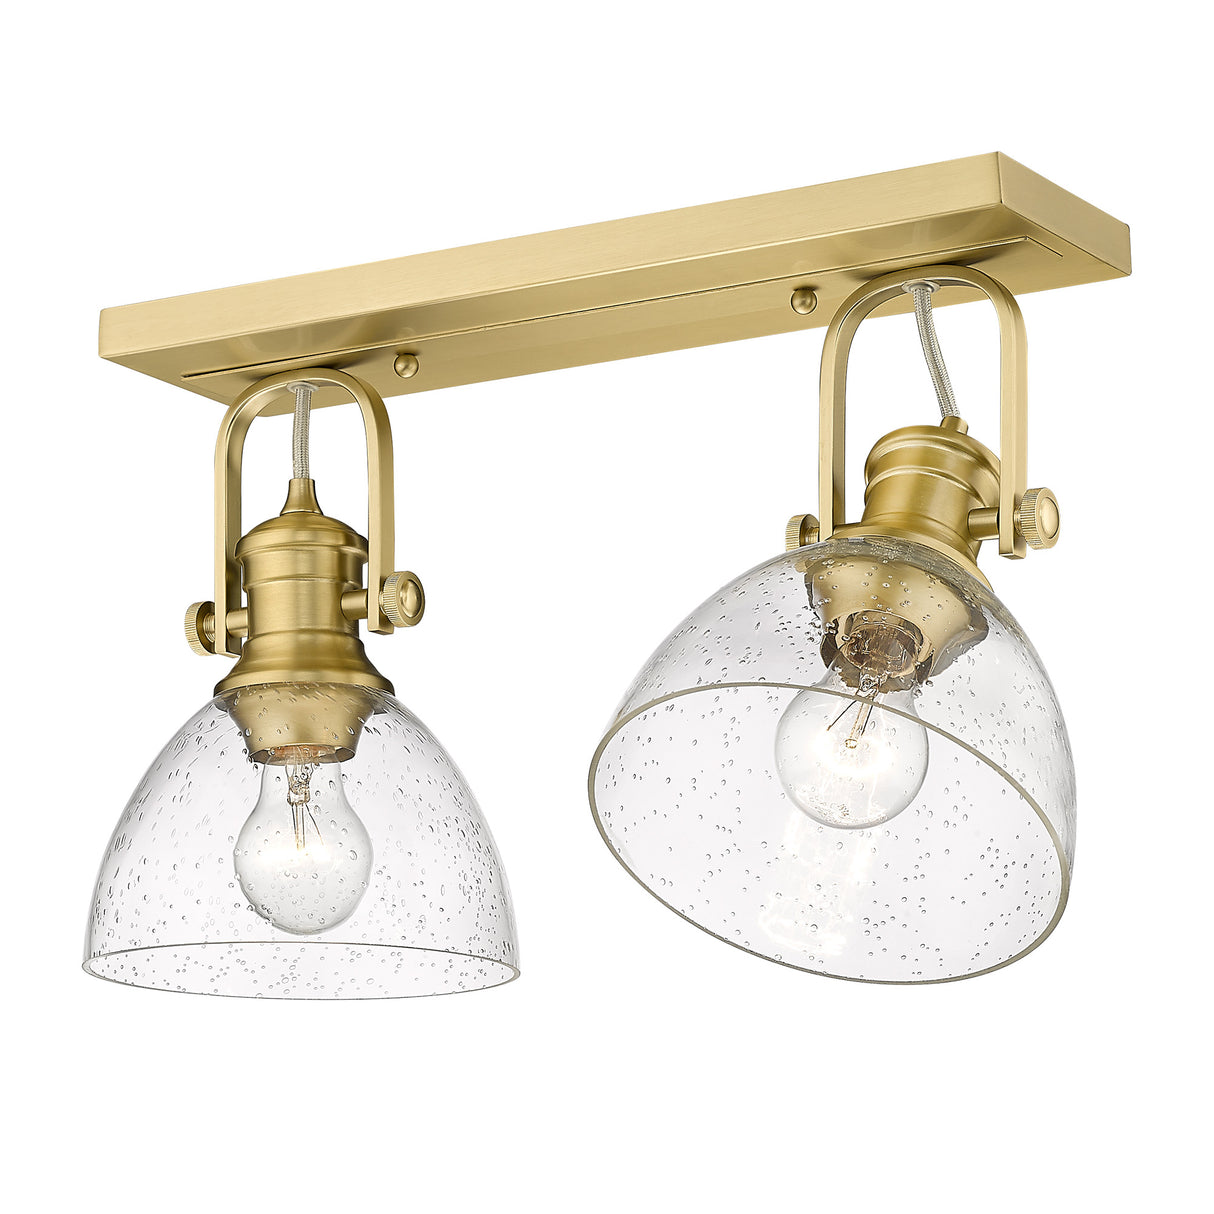 Hines 2 Light Semi-Flush in Brushed Champagne Bronze with Seeded Glass Shades